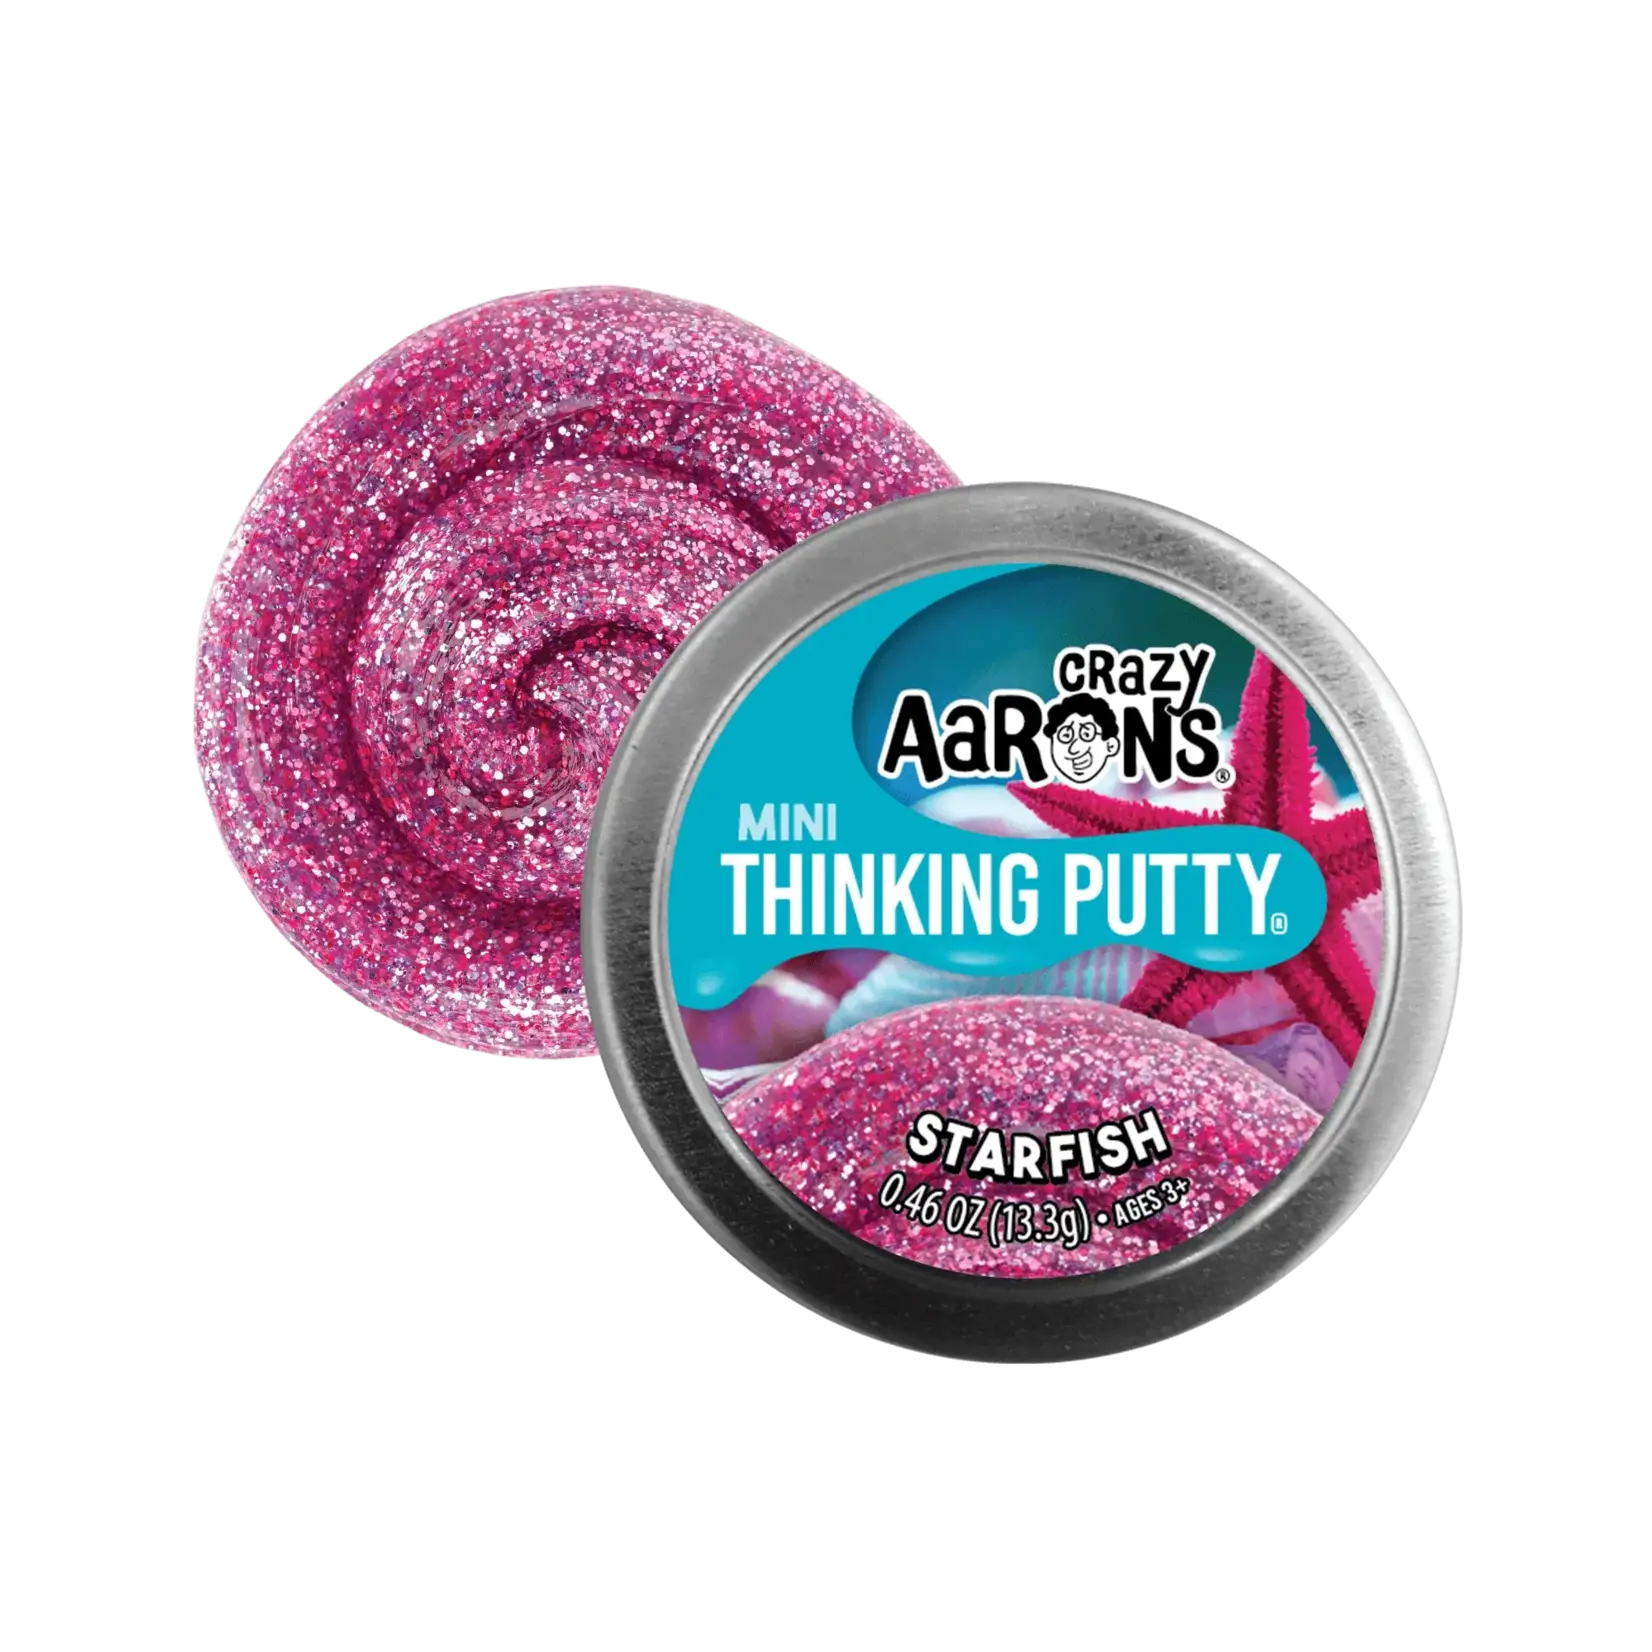 Crazy Aarons Crazy Aaron's Thinking Putty® – Starfish (2")